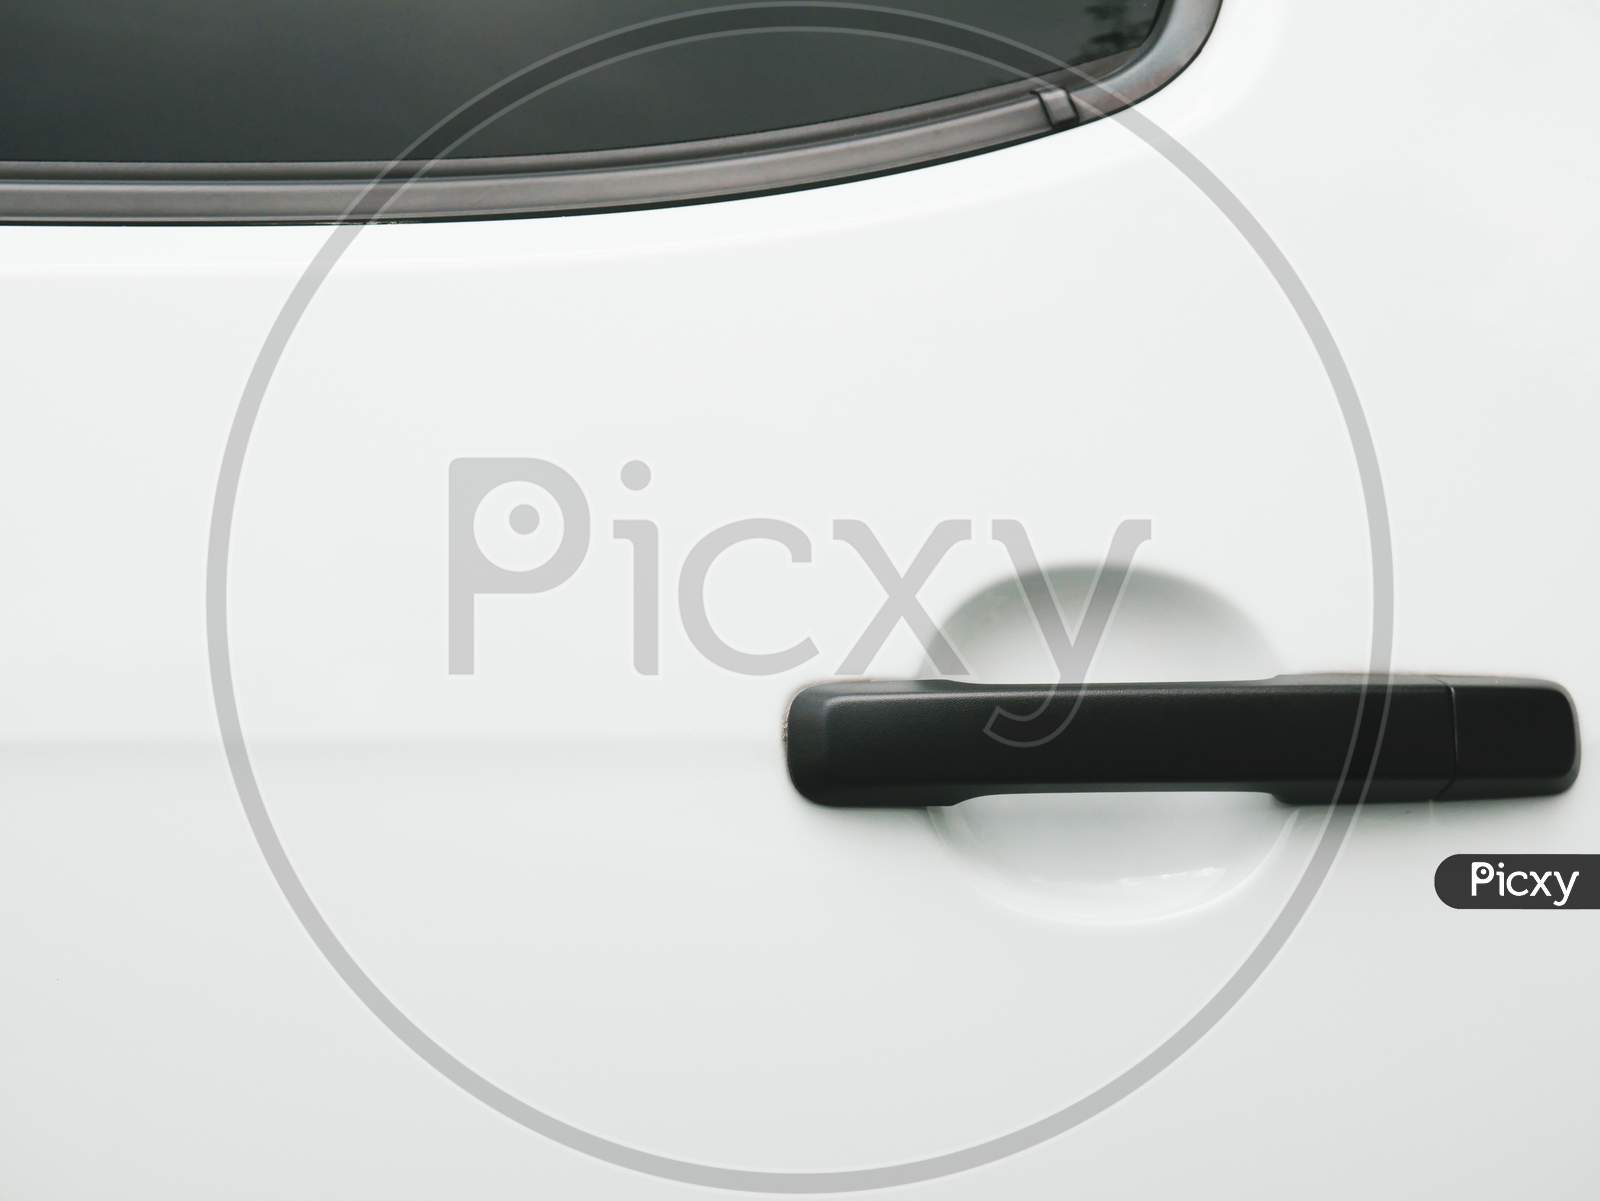 Black Car Door Handle On White Background. Automobile And Texture Concept. Automotive Industry And Safety Lock And Remote Key Accessories Concept. Vehicle Part Unlock Theme